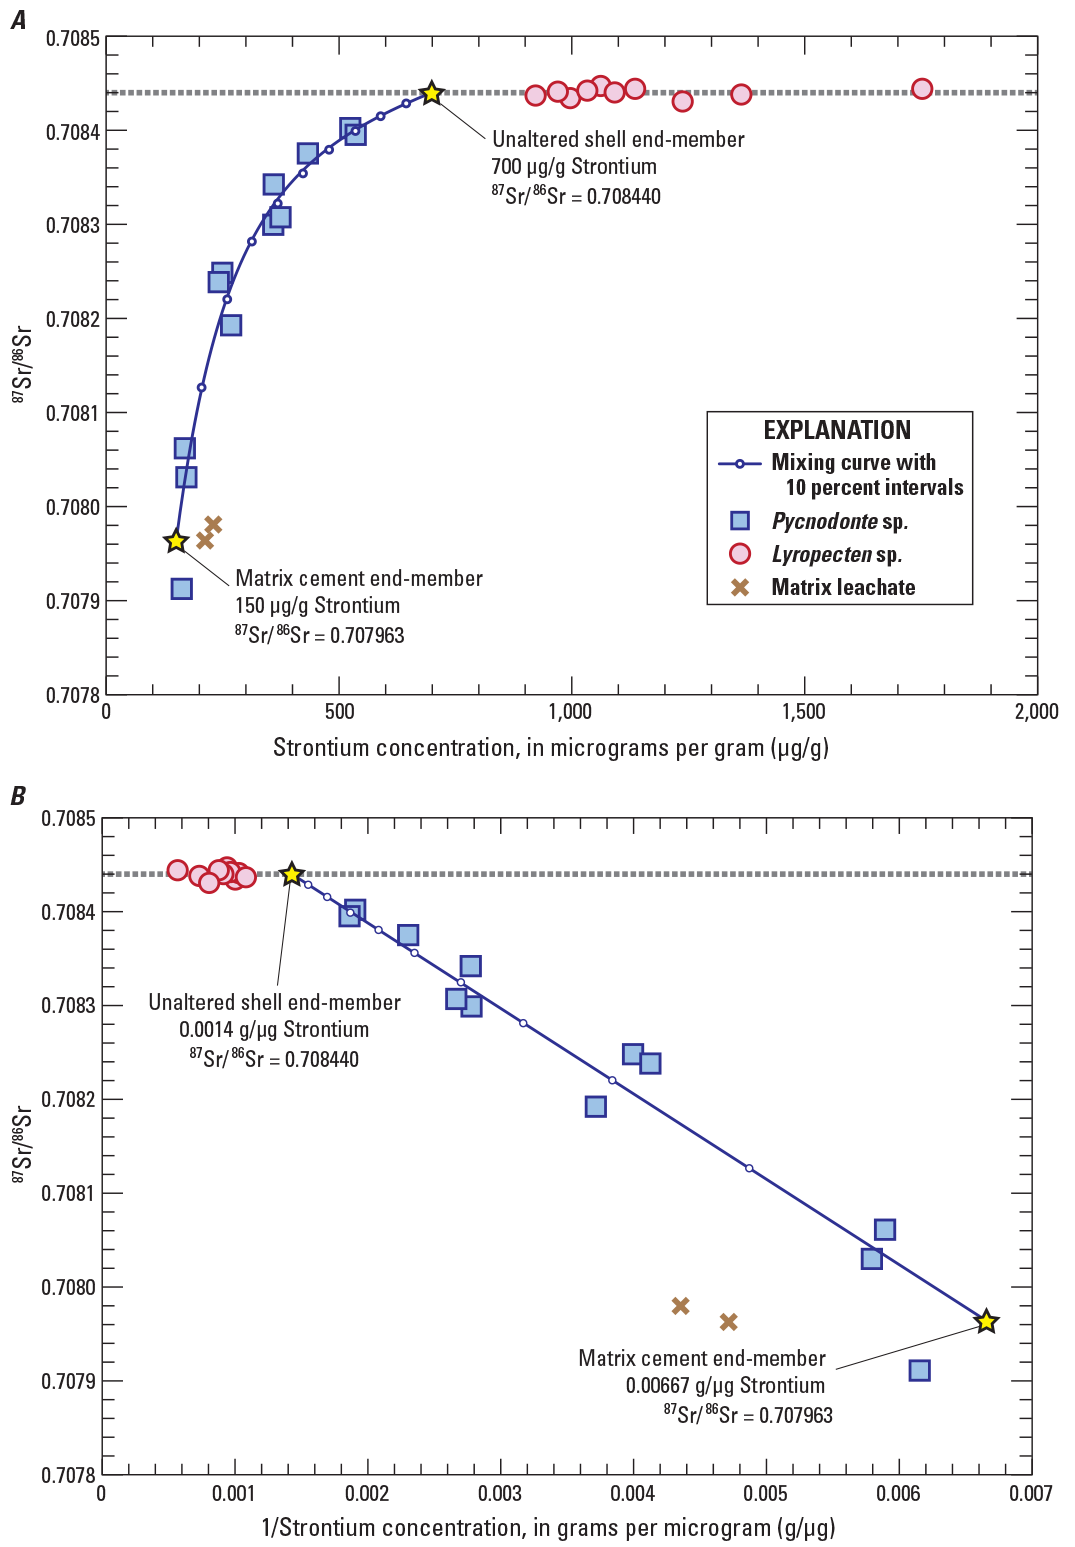 Strontium isotope ratios versus strontium concentration and one over strontium concentration
                           for Pycnodonte sp. and Lyropecten sp. samples showing simple binary mixing relations.